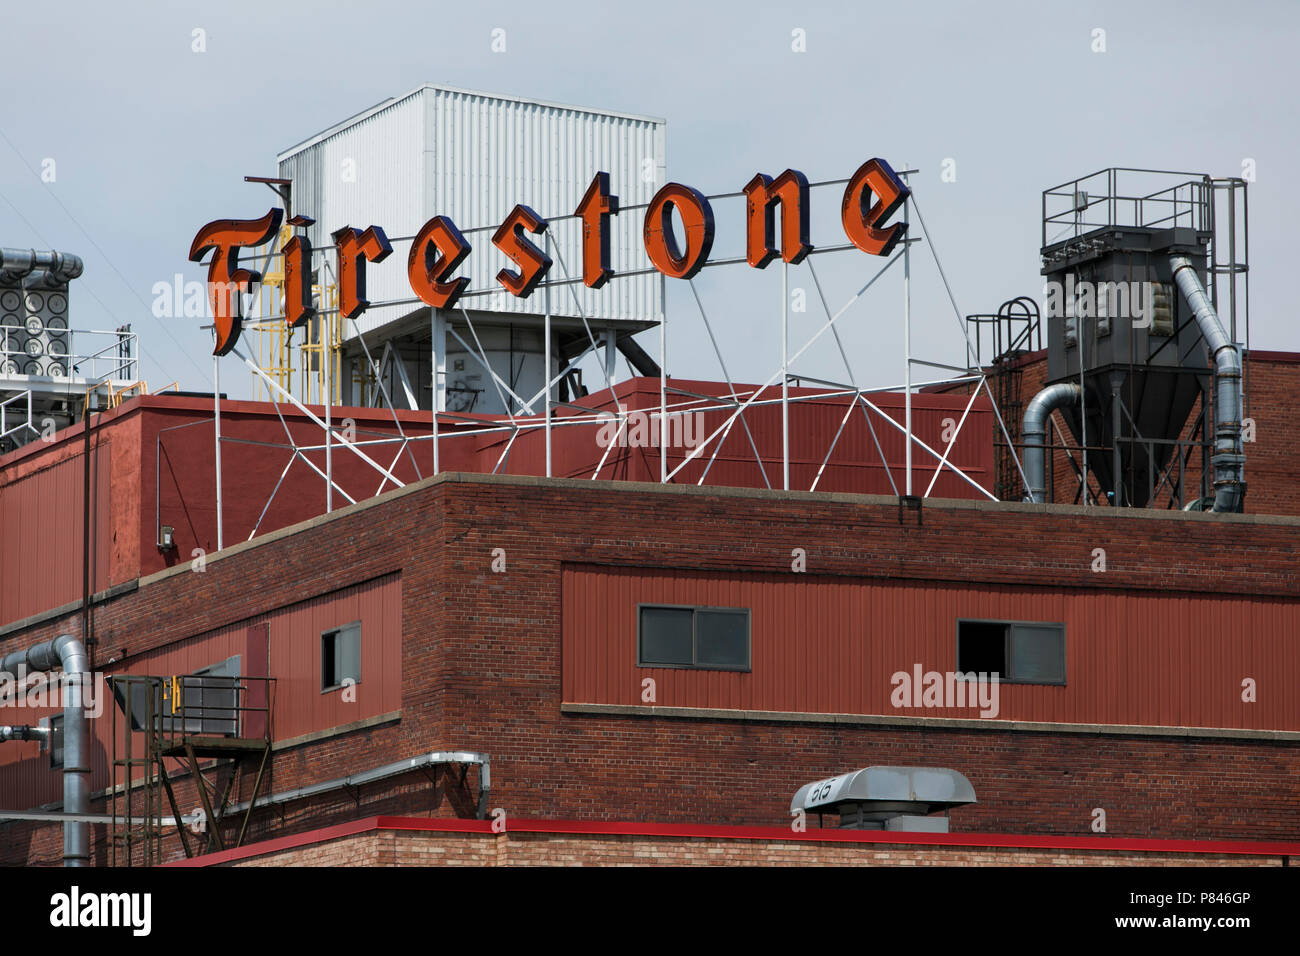 A logo sign outside of the Bridgestone Firestone agricultural tire plant in Des Moines, Iowa, on June 30, 2018. Stock Photo